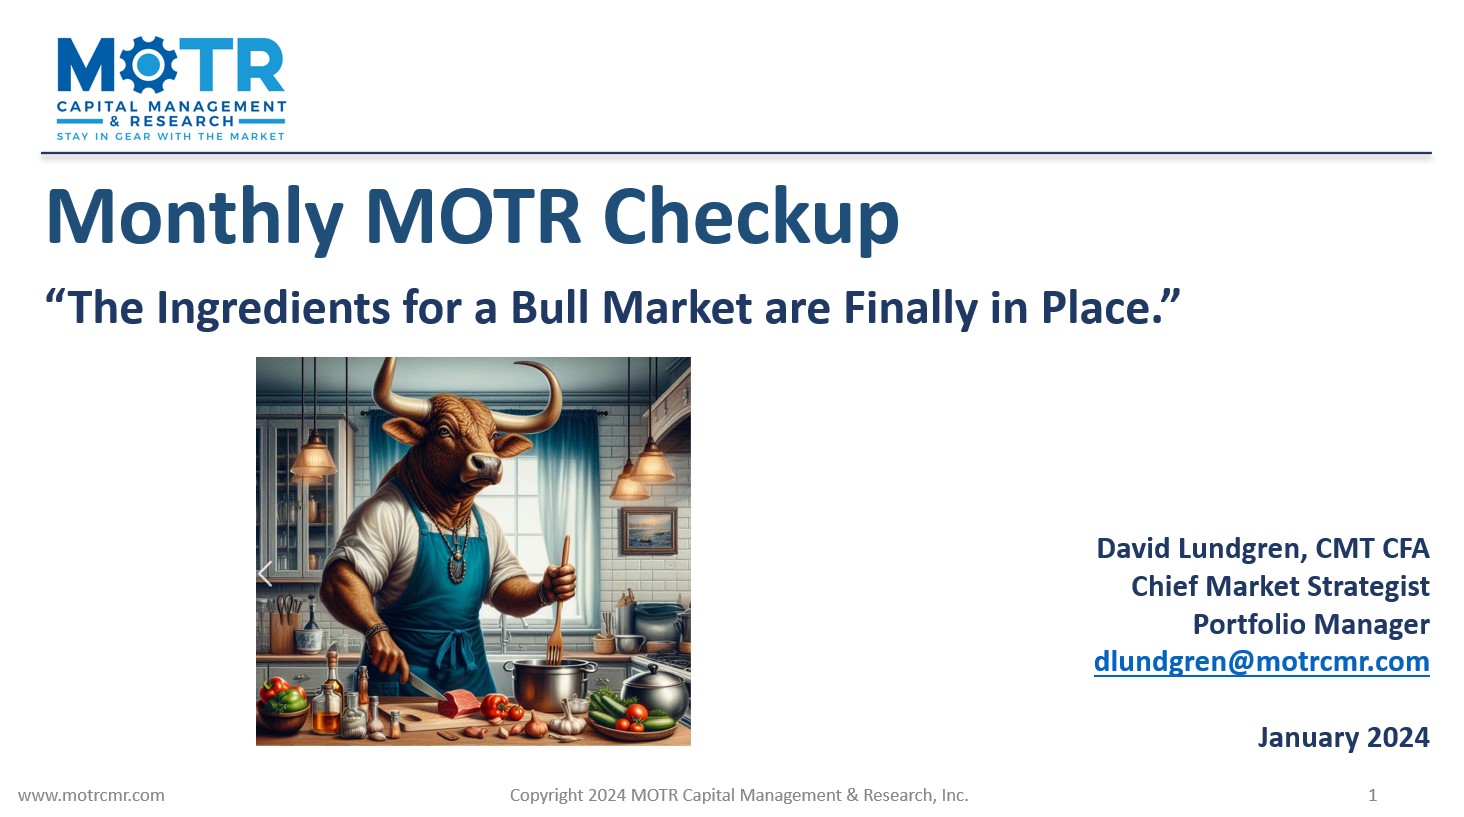 Monthly MOTR Checkup Video (MMC): “The Ingredients for a Bull Market are Finally in Place.”